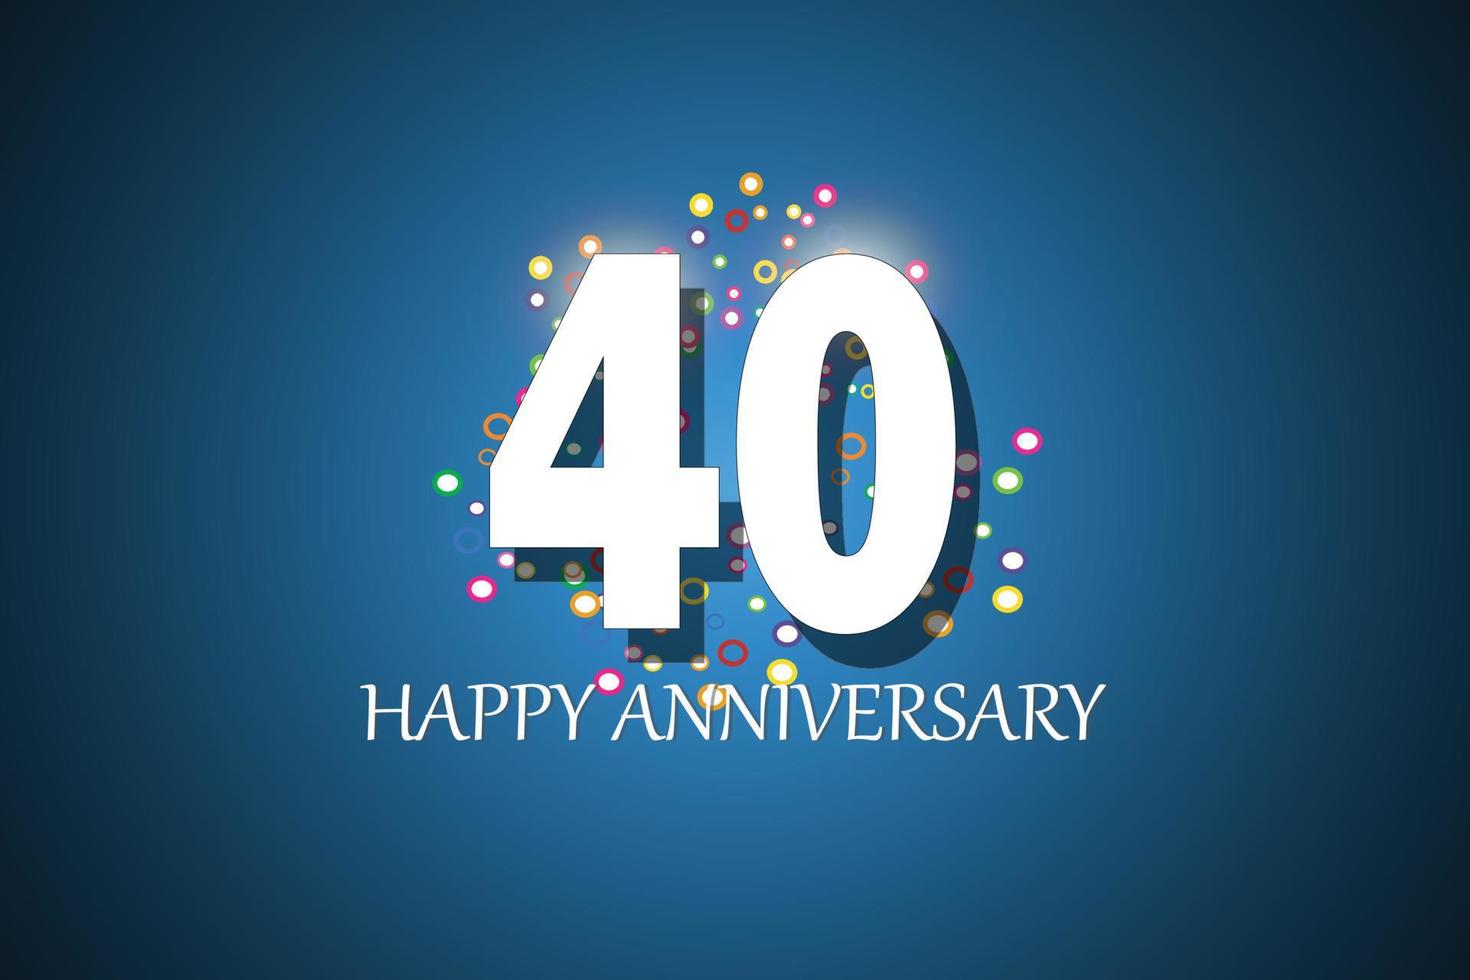 Anniversary on blue background vector